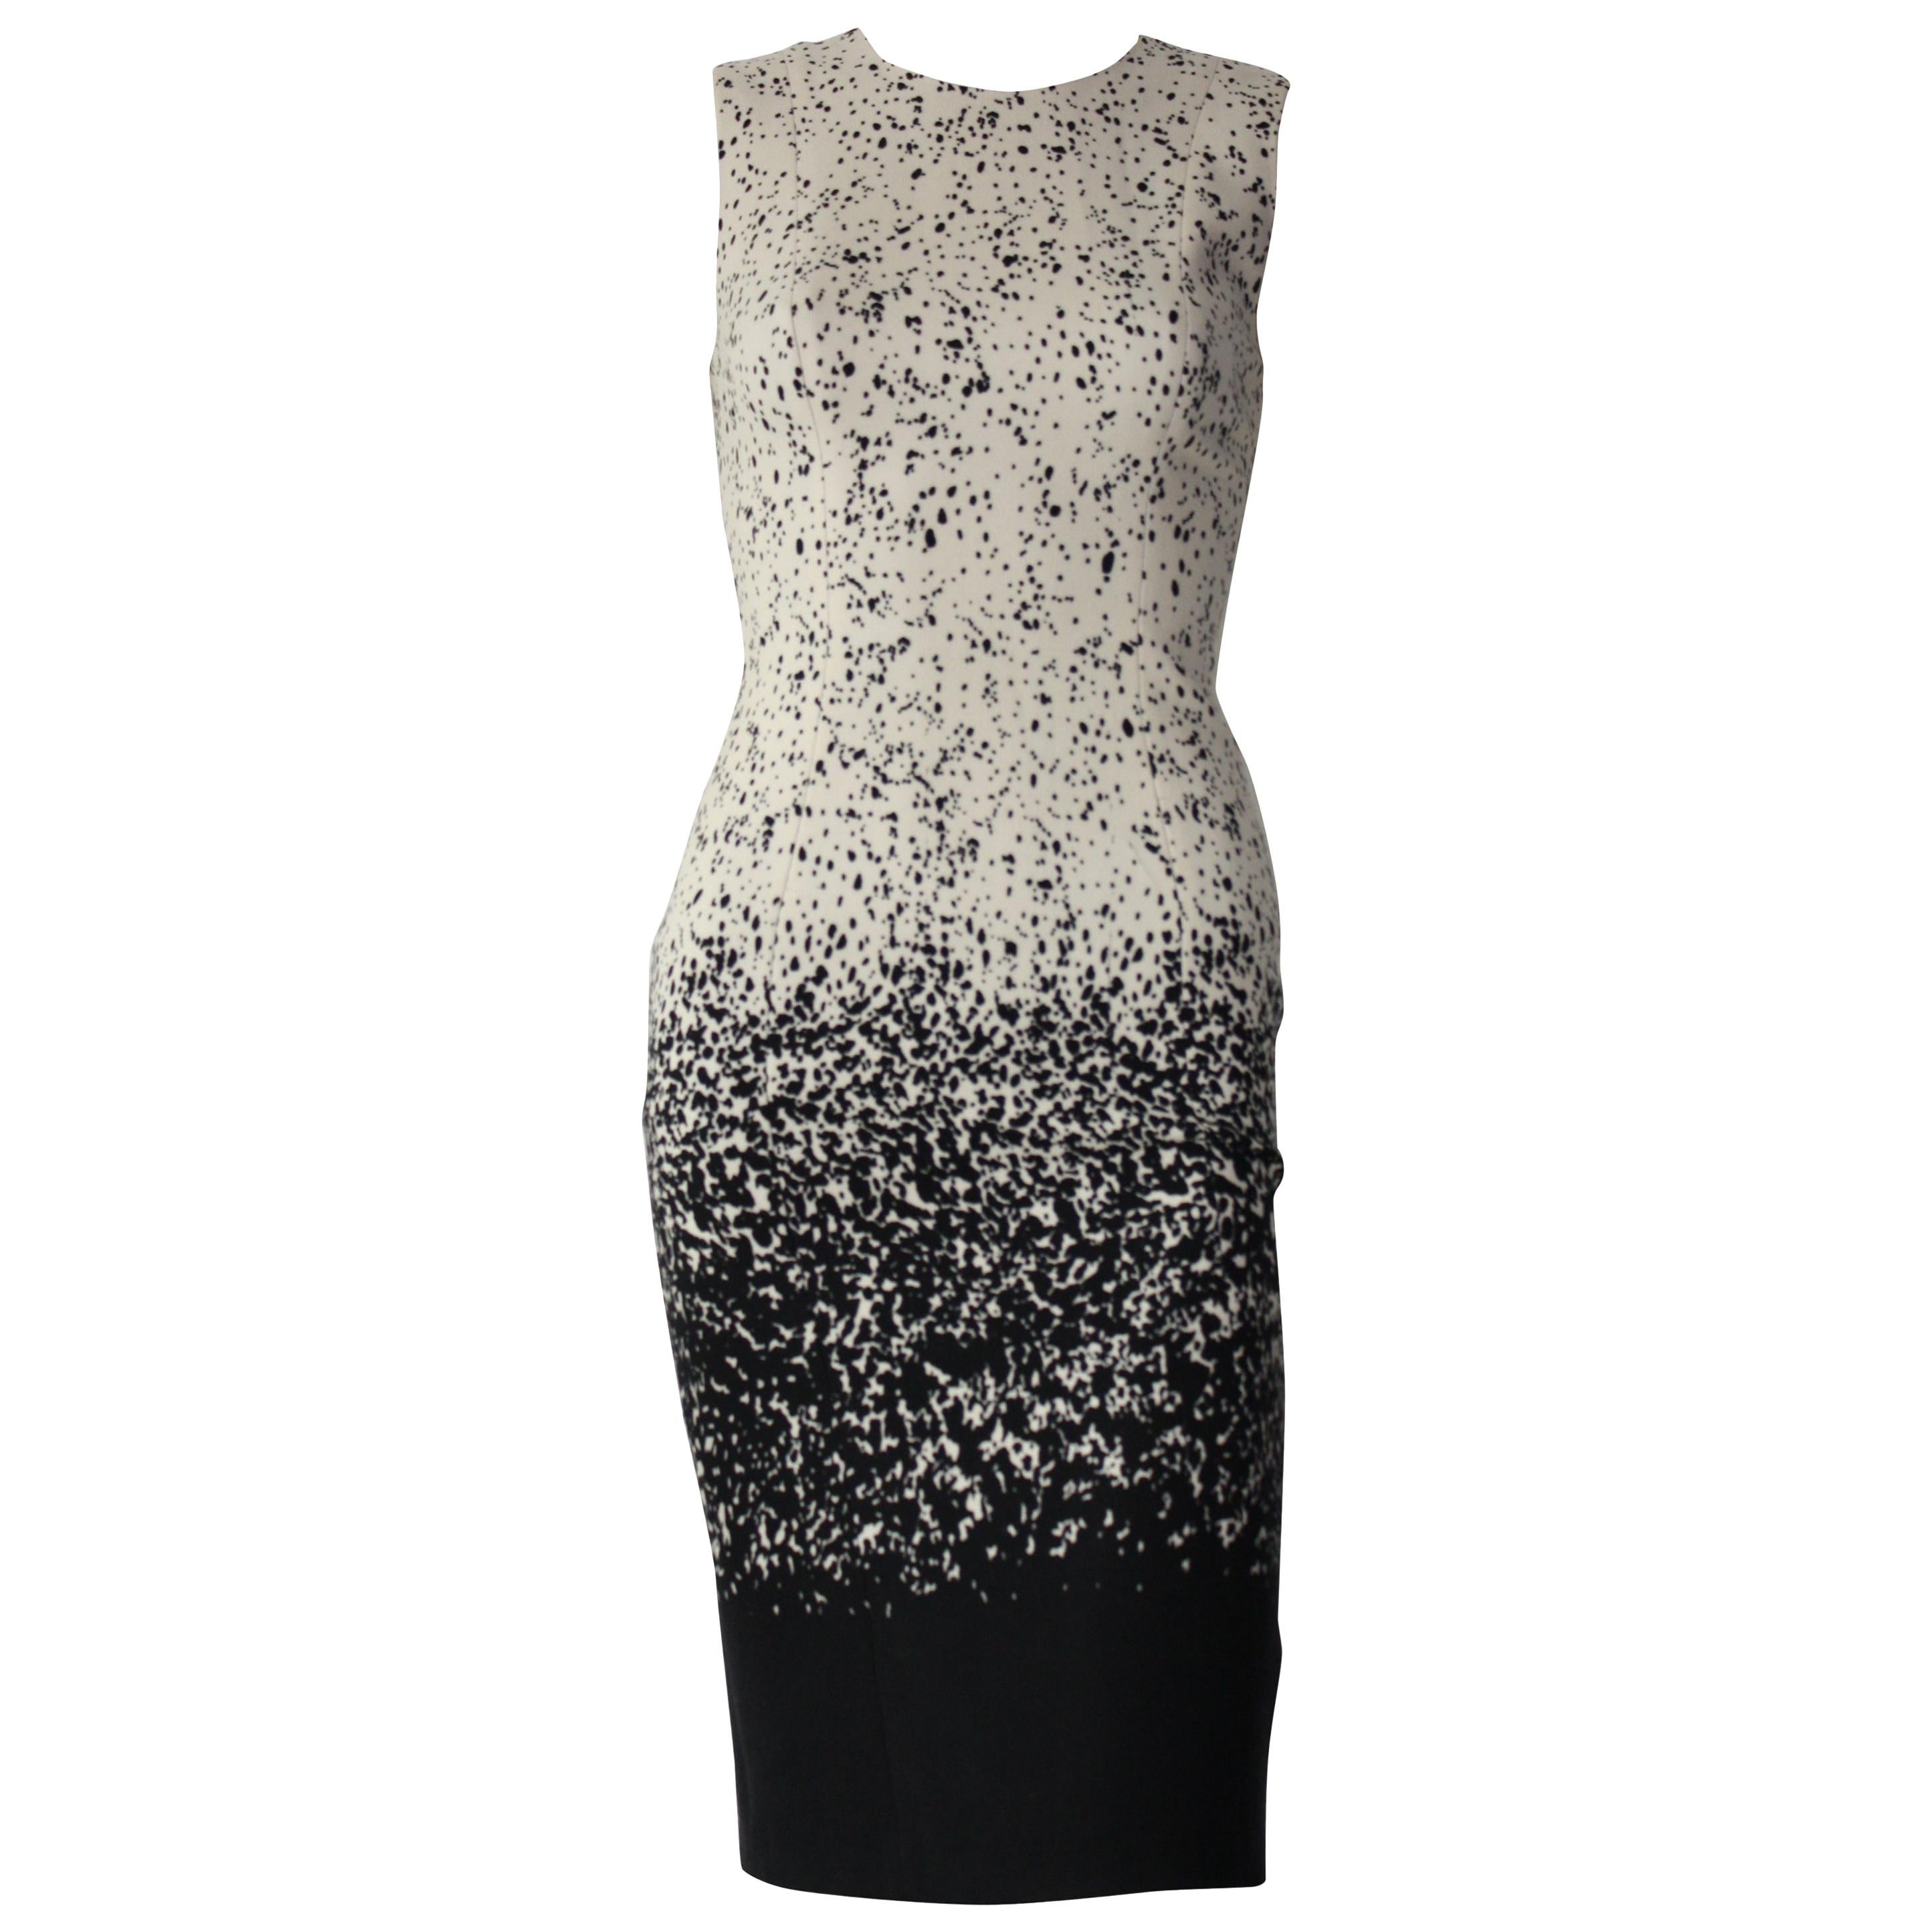 Burberry Wool Black and White Speckle Shift Dress Size 38 For Sale